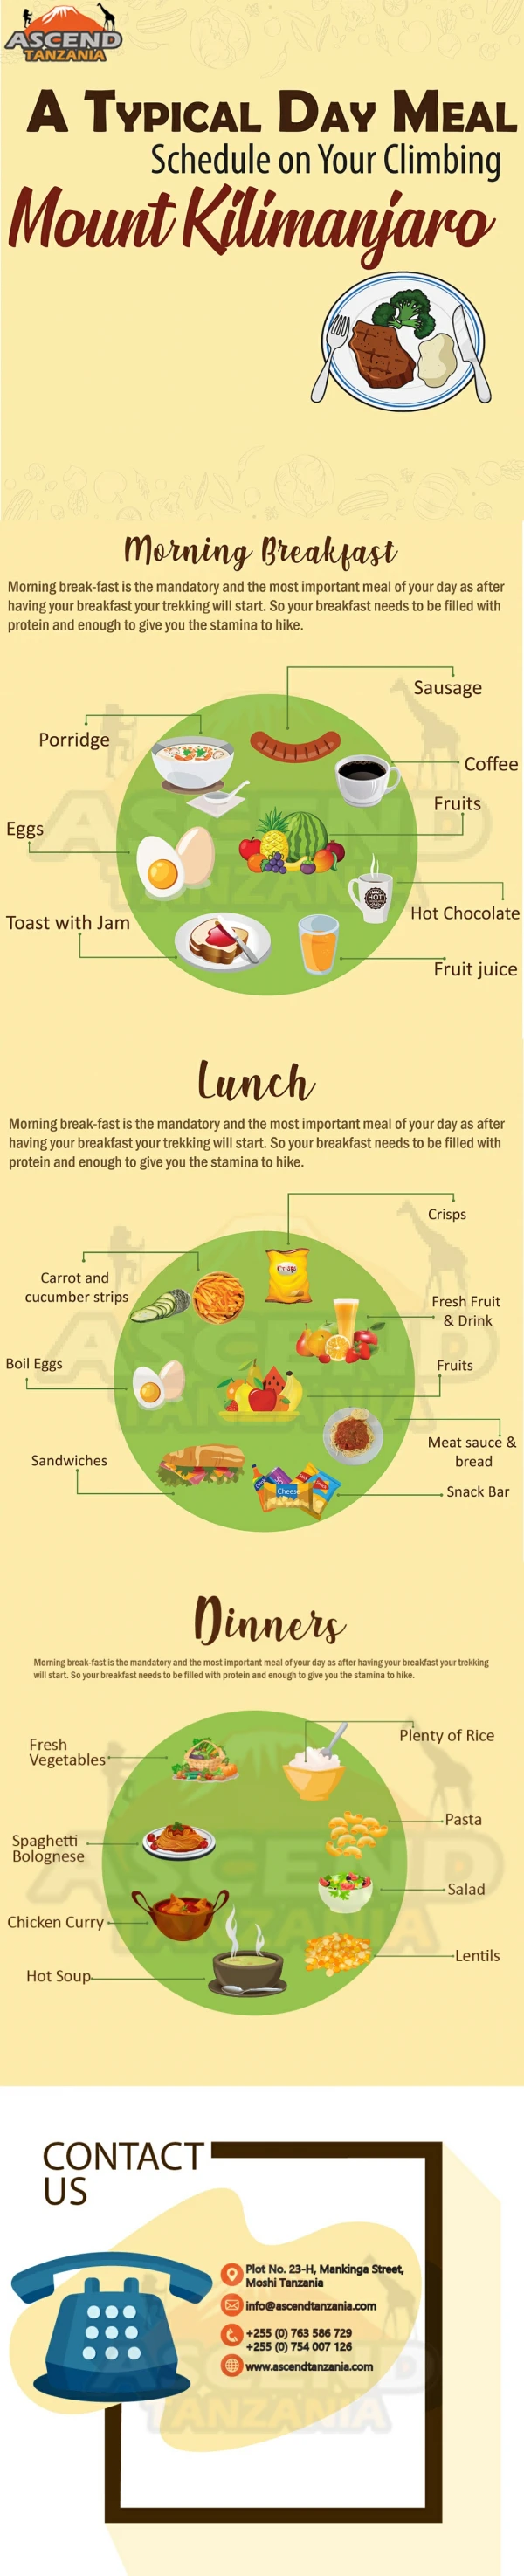 A Typical Day Meal Schedule On Your Climbing Mount Kilimanjaro